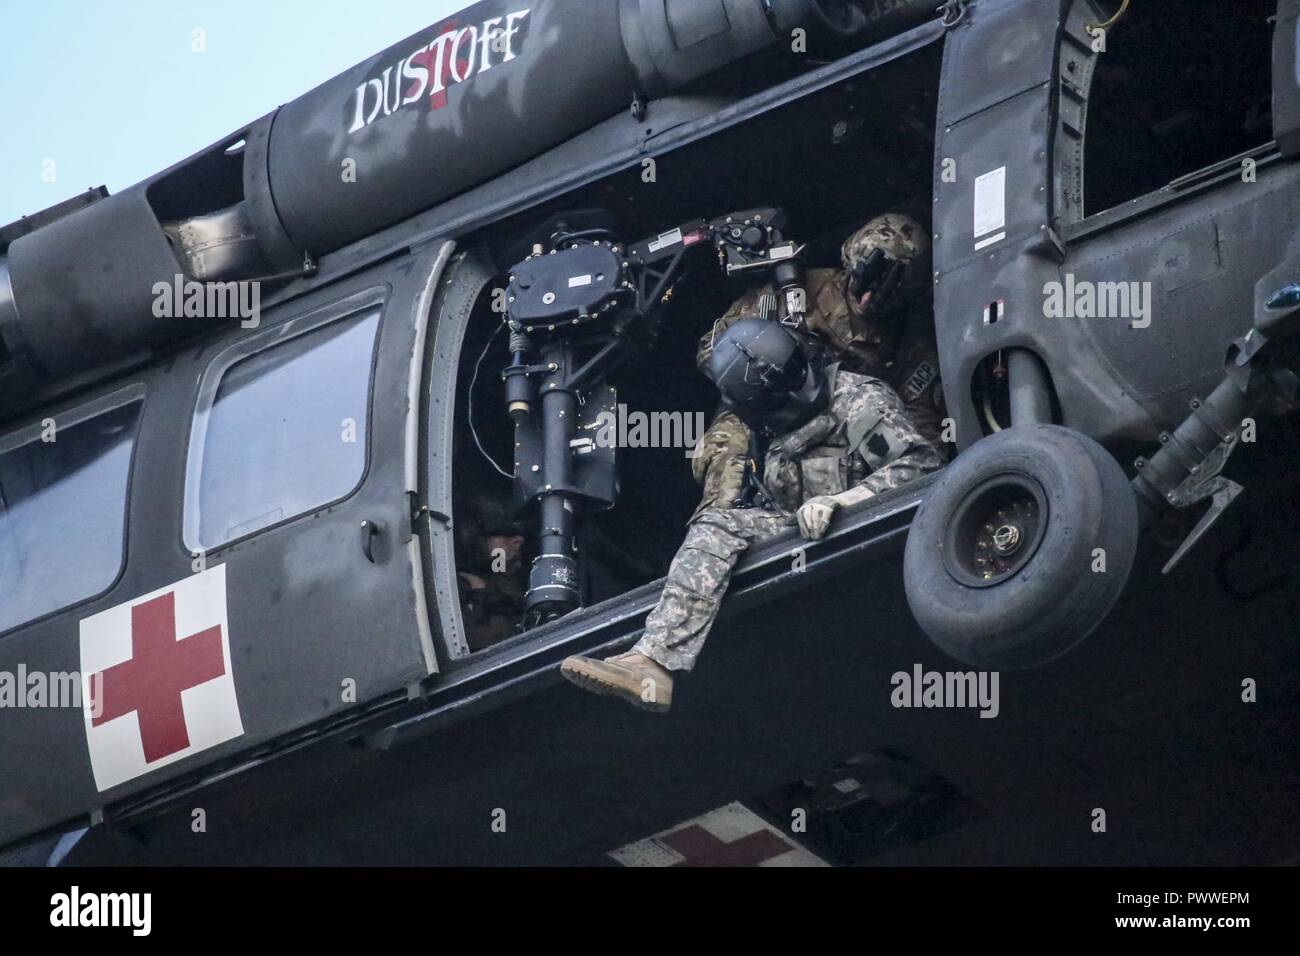 U.S. Army National Guard Sgt. Timothy Witts, a UH-60 Black Hawk helicopter crew chief, scans the area before lowering a hoist during joint training for New Jersey Task Force One at Joint Base McGuire-Dix-Lakehurst, N.J., June 28, 2017. The primary mission of New Jersey Task Force One is to provide advanced technical search and rescue capabilities to victims trapped or entombed in structurally collapsed buildings. Stock Photo